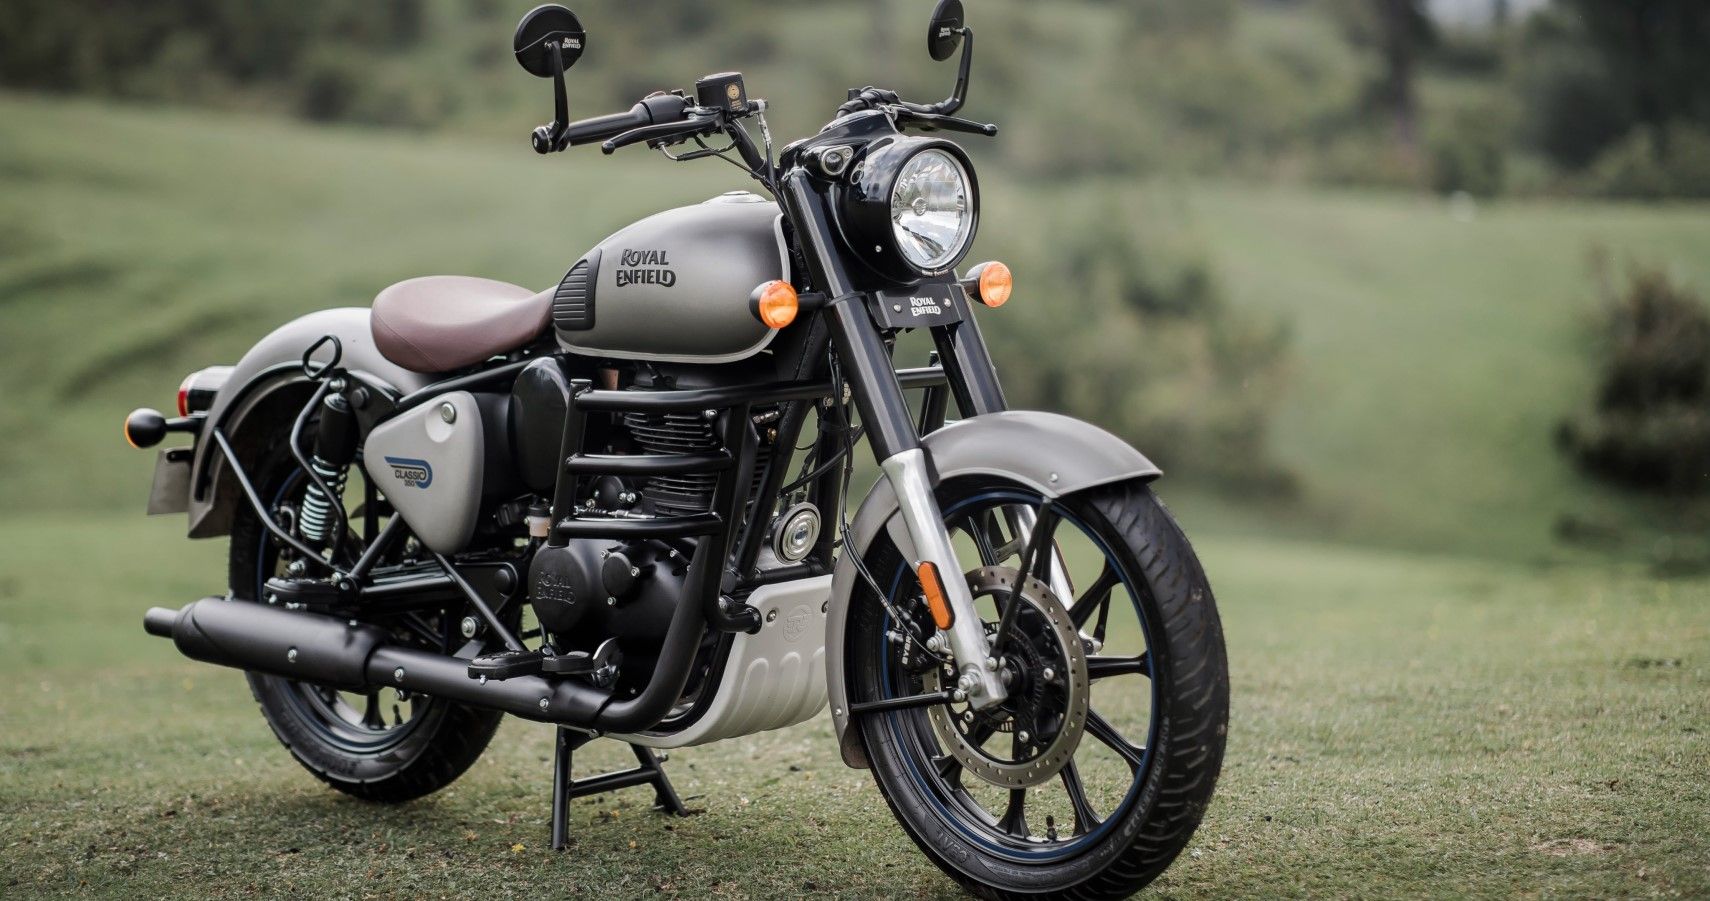 2022 Royal Enfield 350 looks cool in a modern avatar